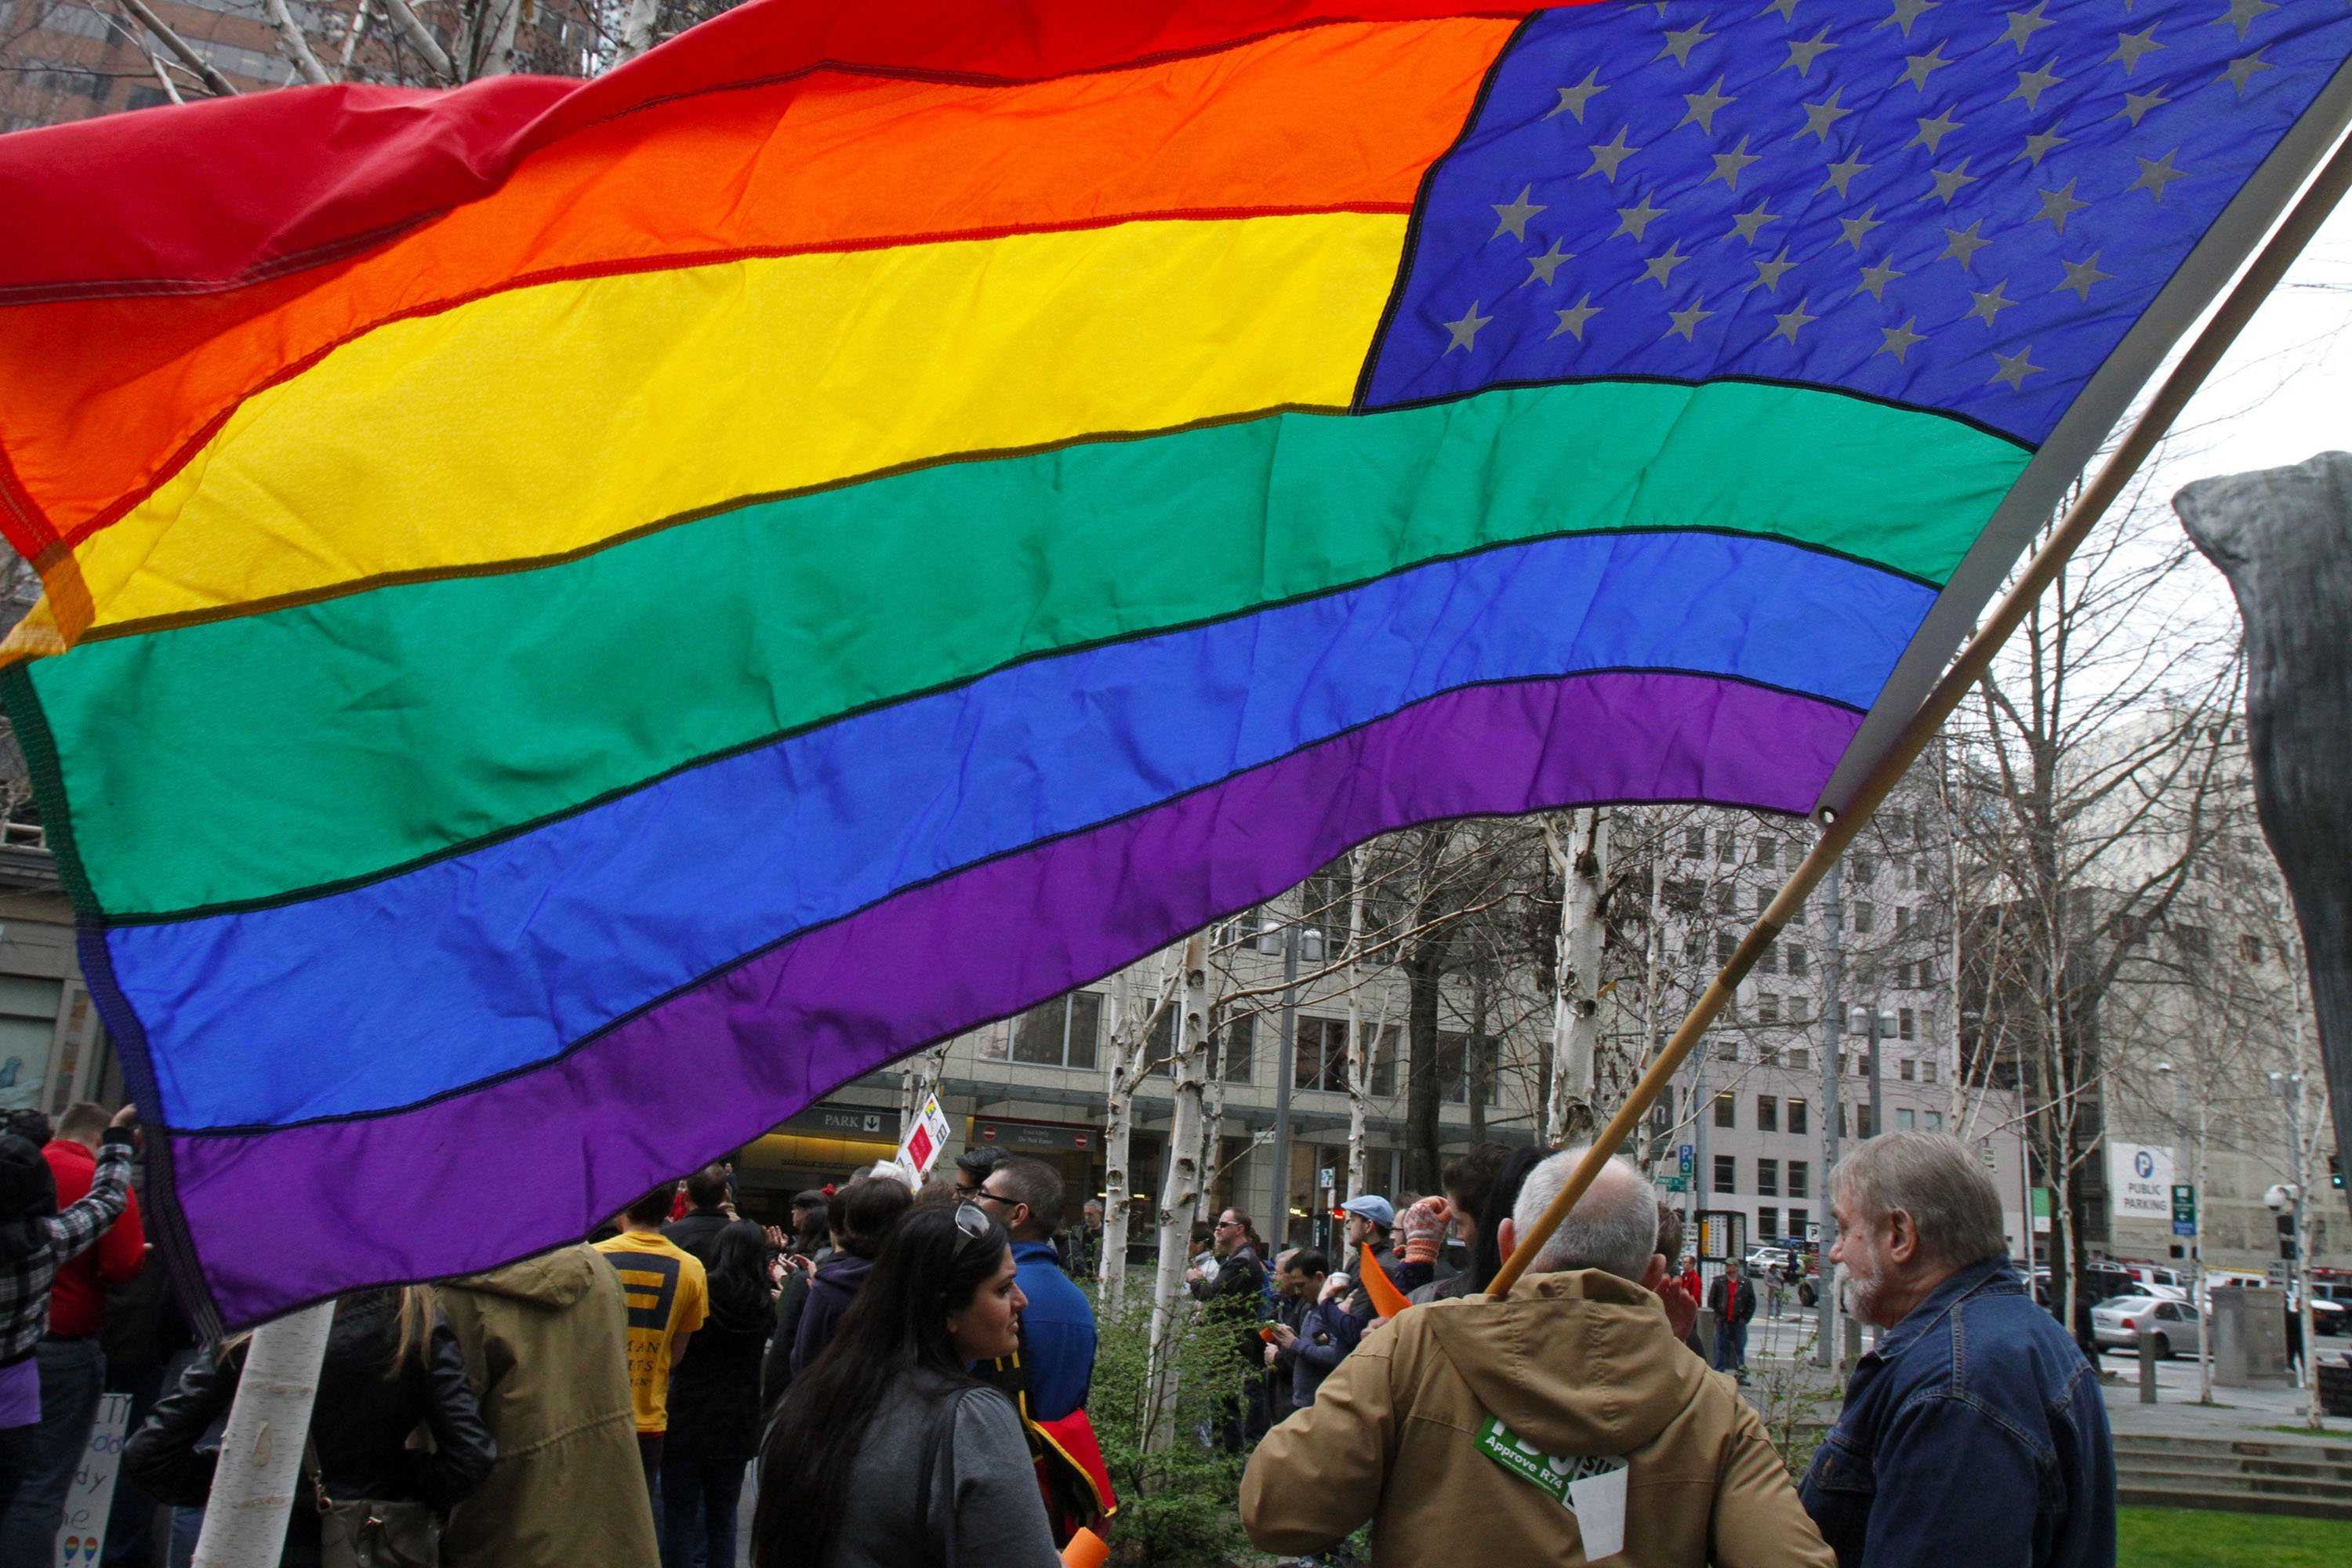 A gay-marriage supporter flies a rainbow flag during a rally in Seattle, Washington, in March, when the U.S. Supreme Court heard arguments in a case that led to federal recognition of same-sex marriages. (Greg Gilbert/Seattle Times/MCT)